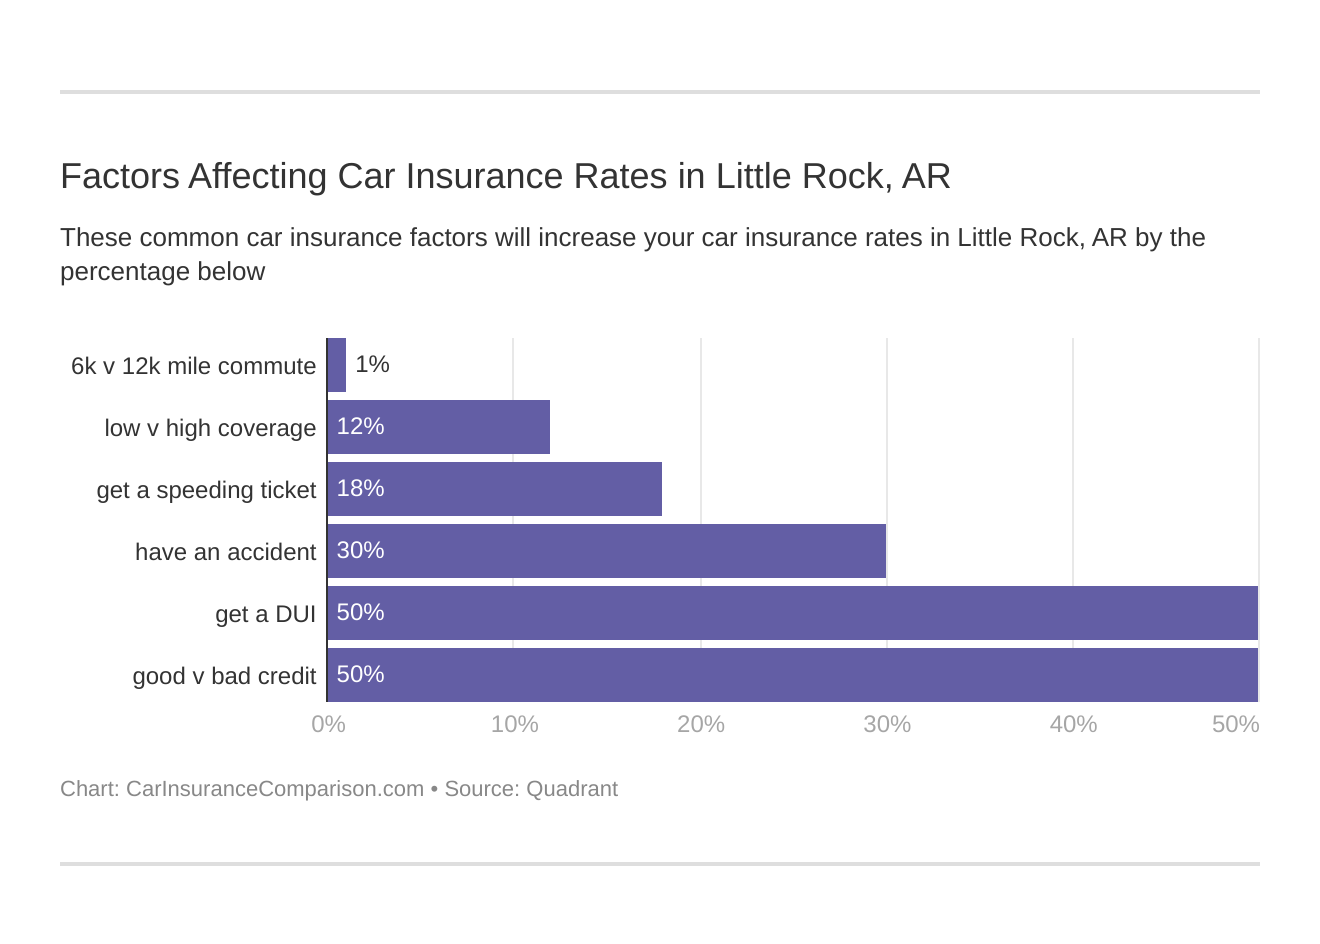 Factors Affecting Car Insurance Rates in Little Rock, AR